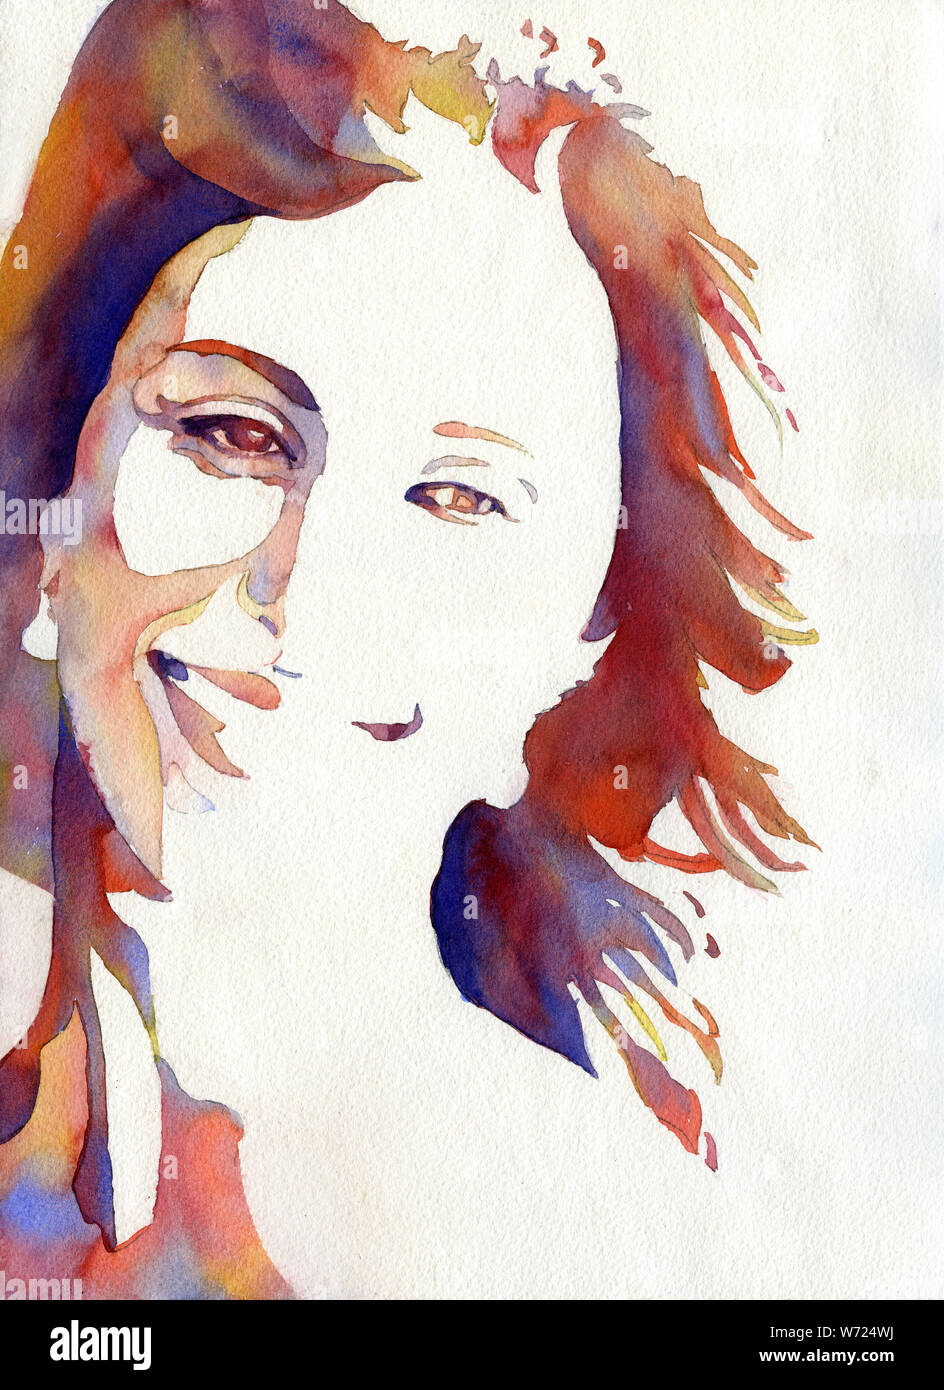 Woman Smiling. Fine Art Watercolor Of Woman Smiling. Fashion Illustration Home Decor People Watercolor Stock Photo - Alamy